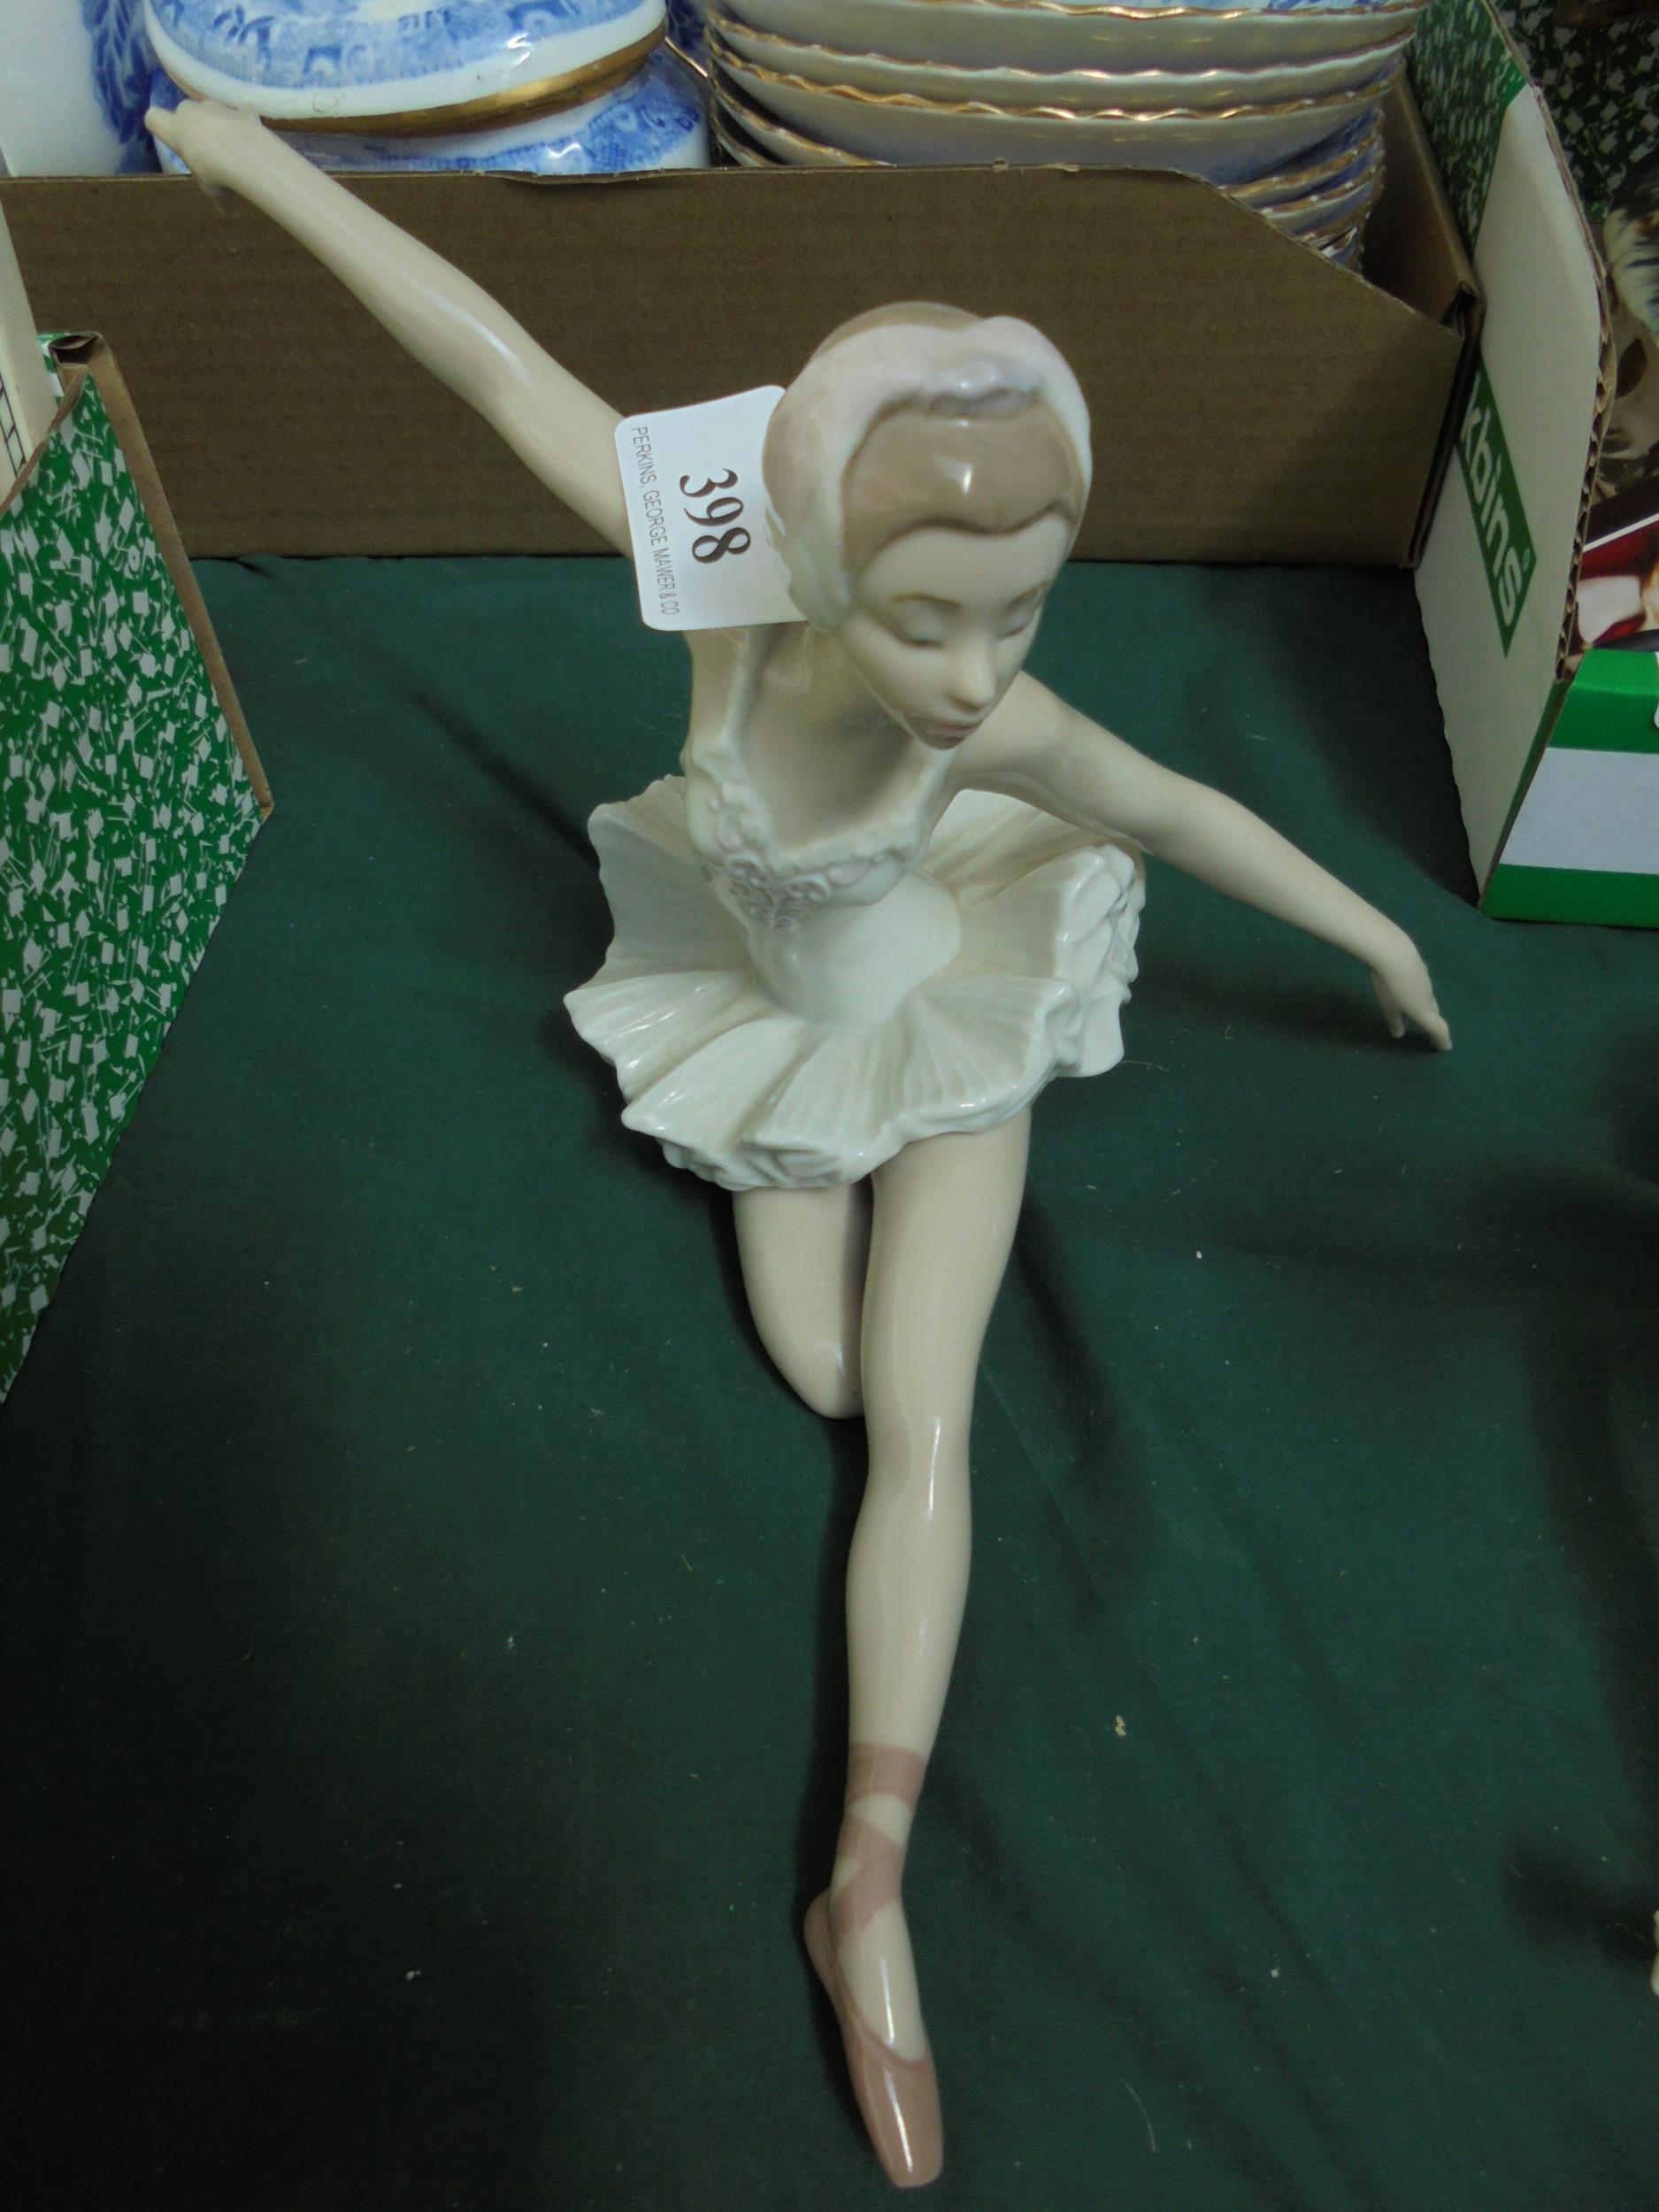 Porcelain figurine of a ballerina with arms out